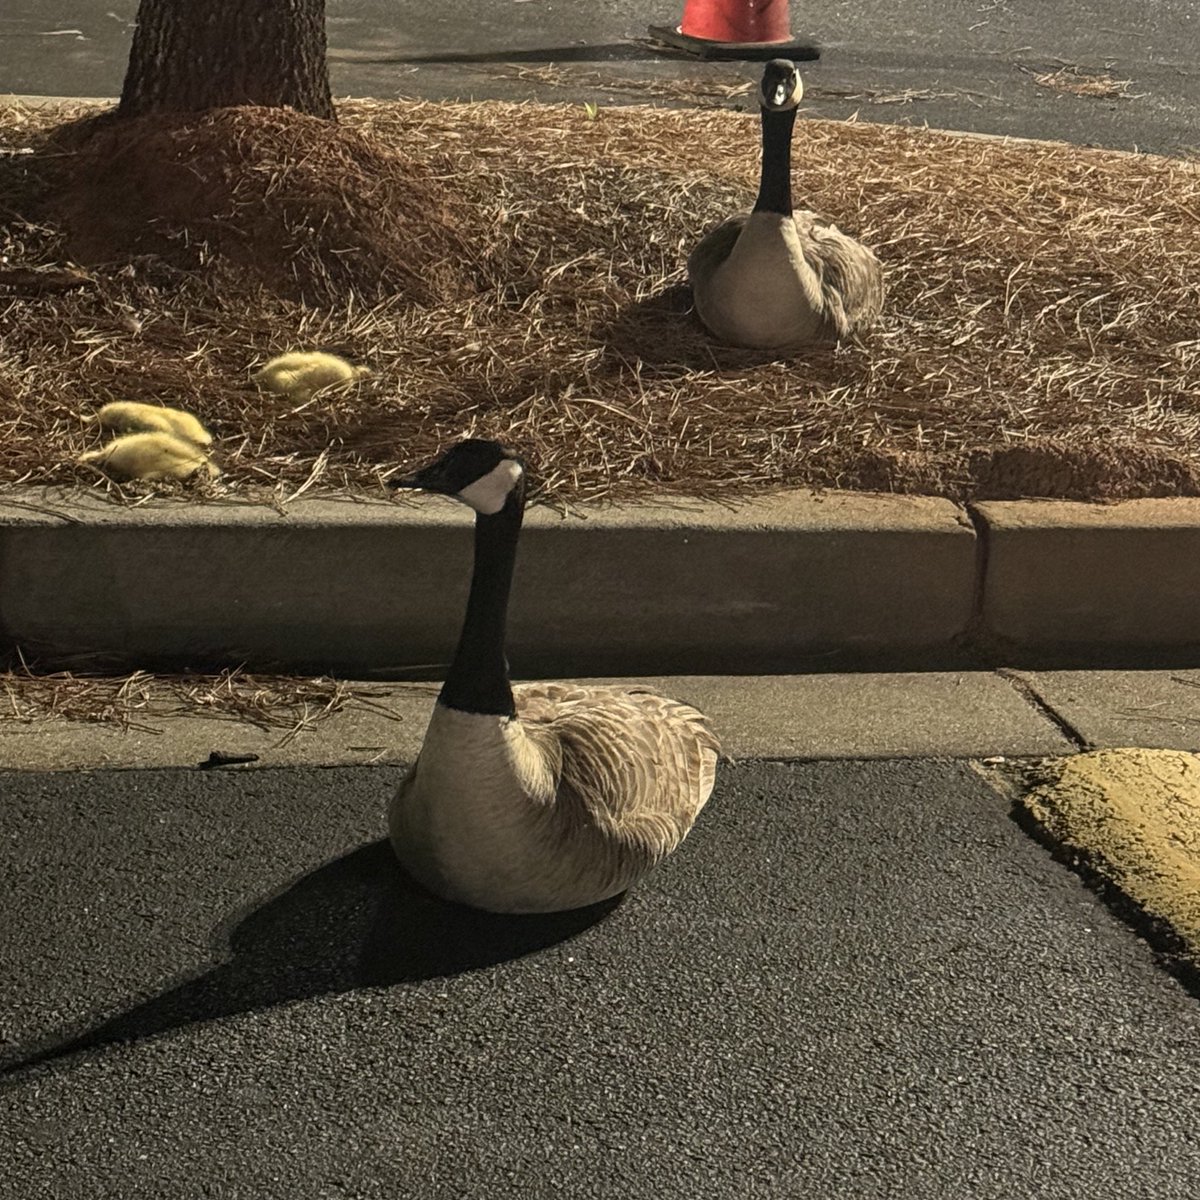 I’m kind of guessing, but I think Mother and Father lost their babies to disease. They’ve been standing guard for a couple of days so far. It’s sad, but their dedication is also beautiful #nature #canadagoose #family